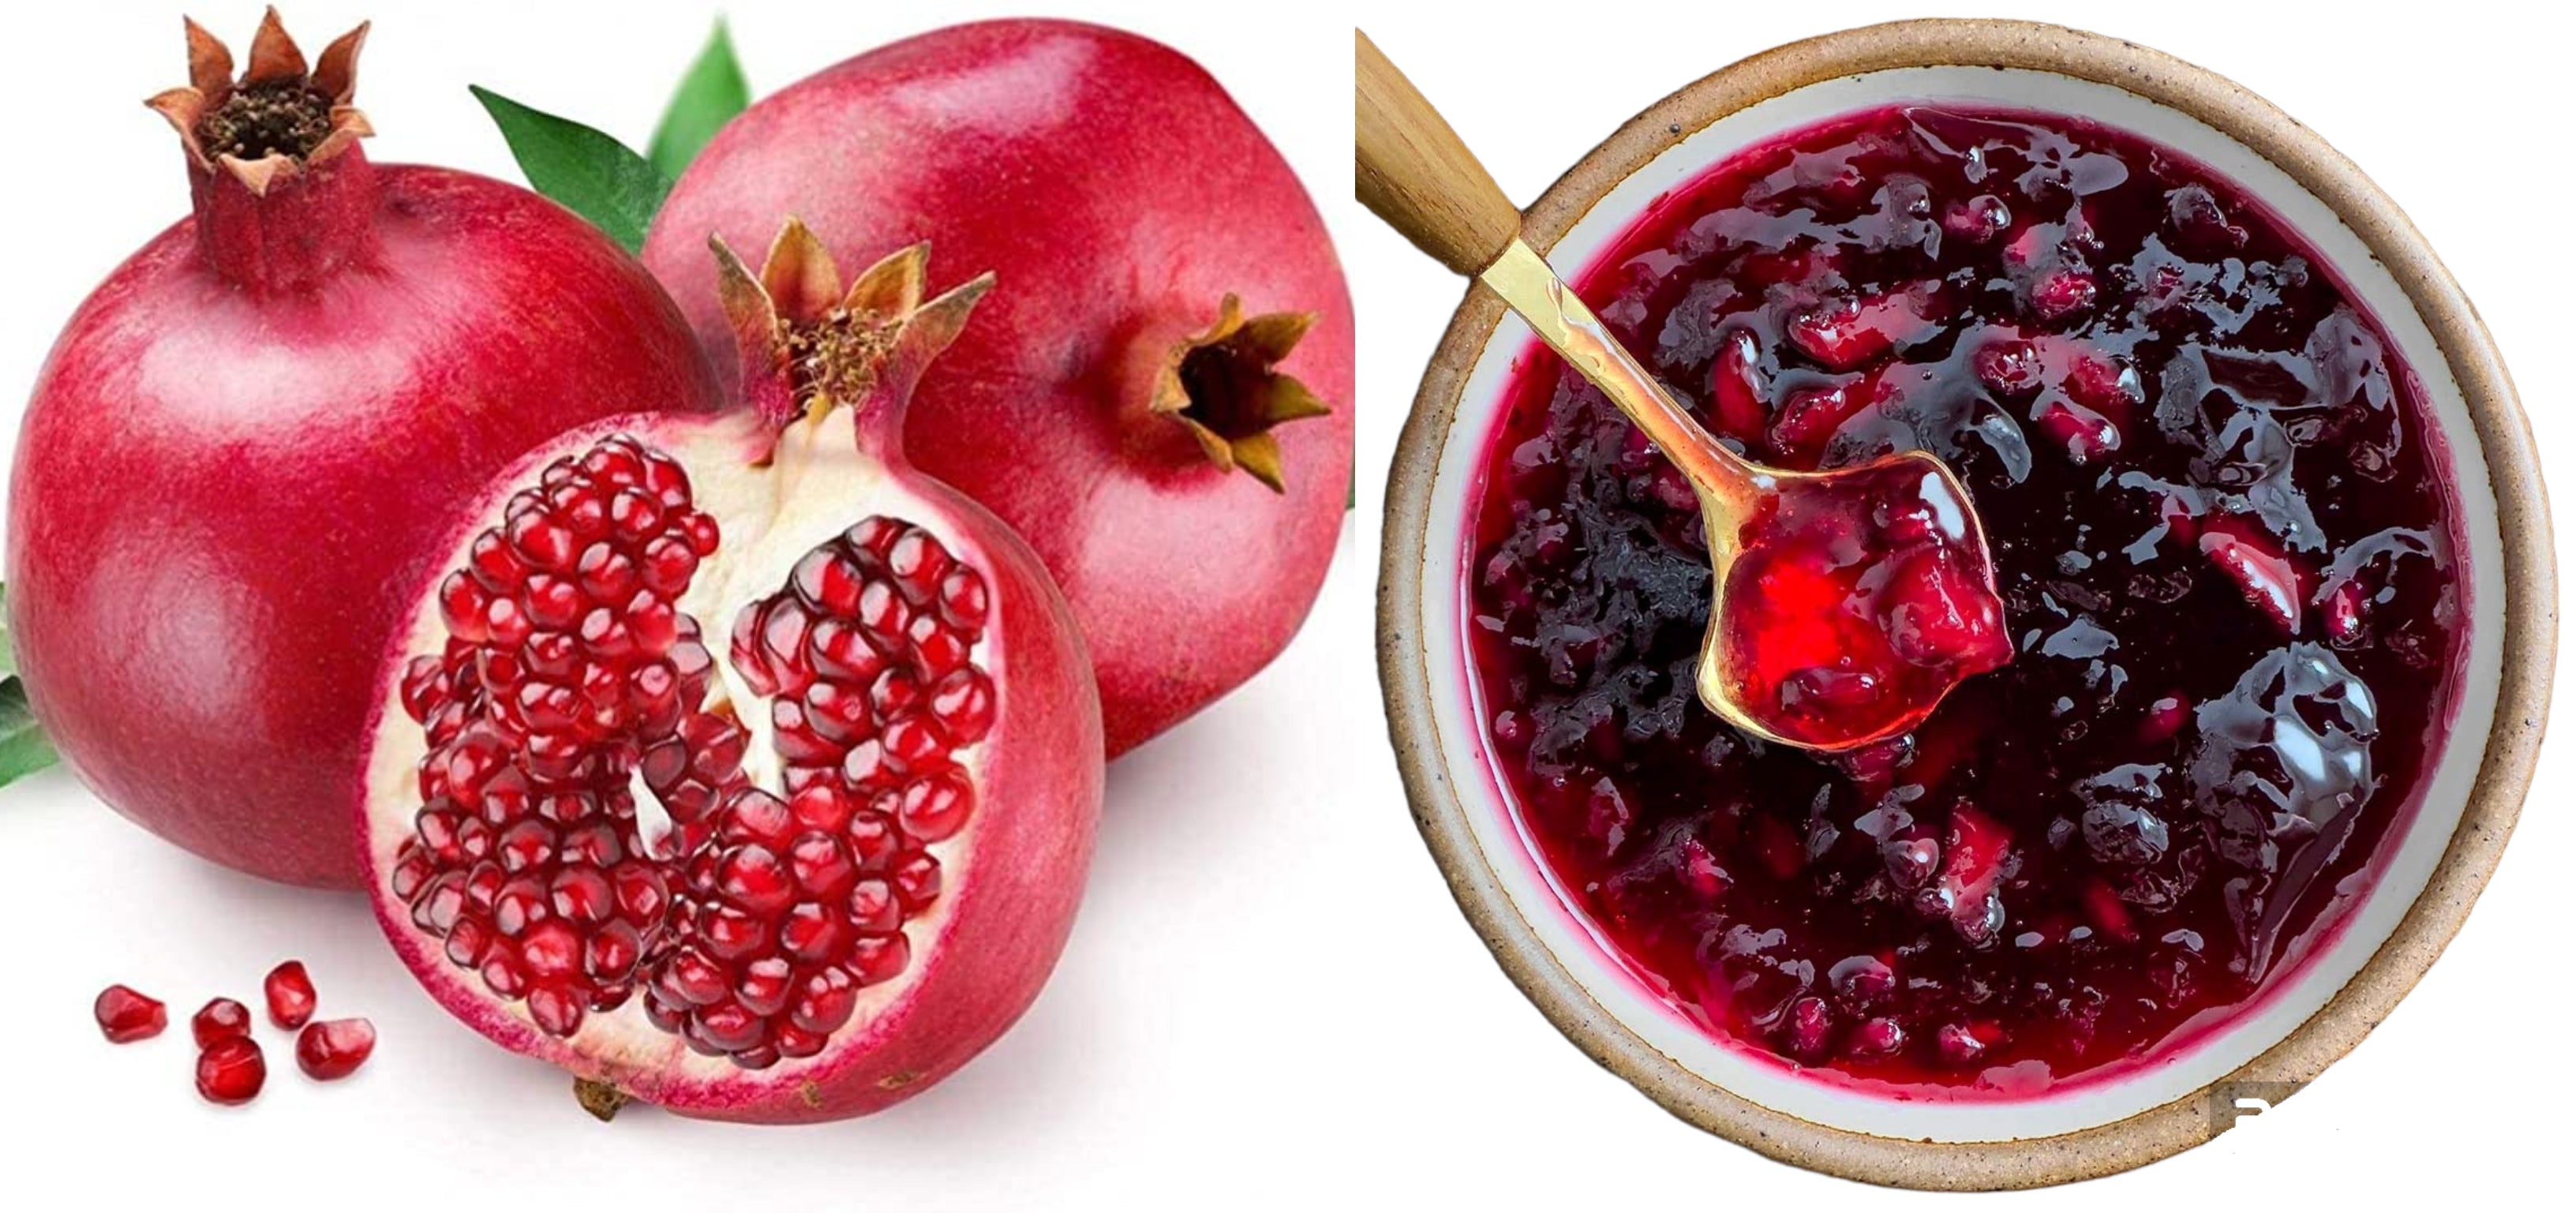 Greek Natural 100% Ηandmade Fruit Spread Pomegranate with Honey 2